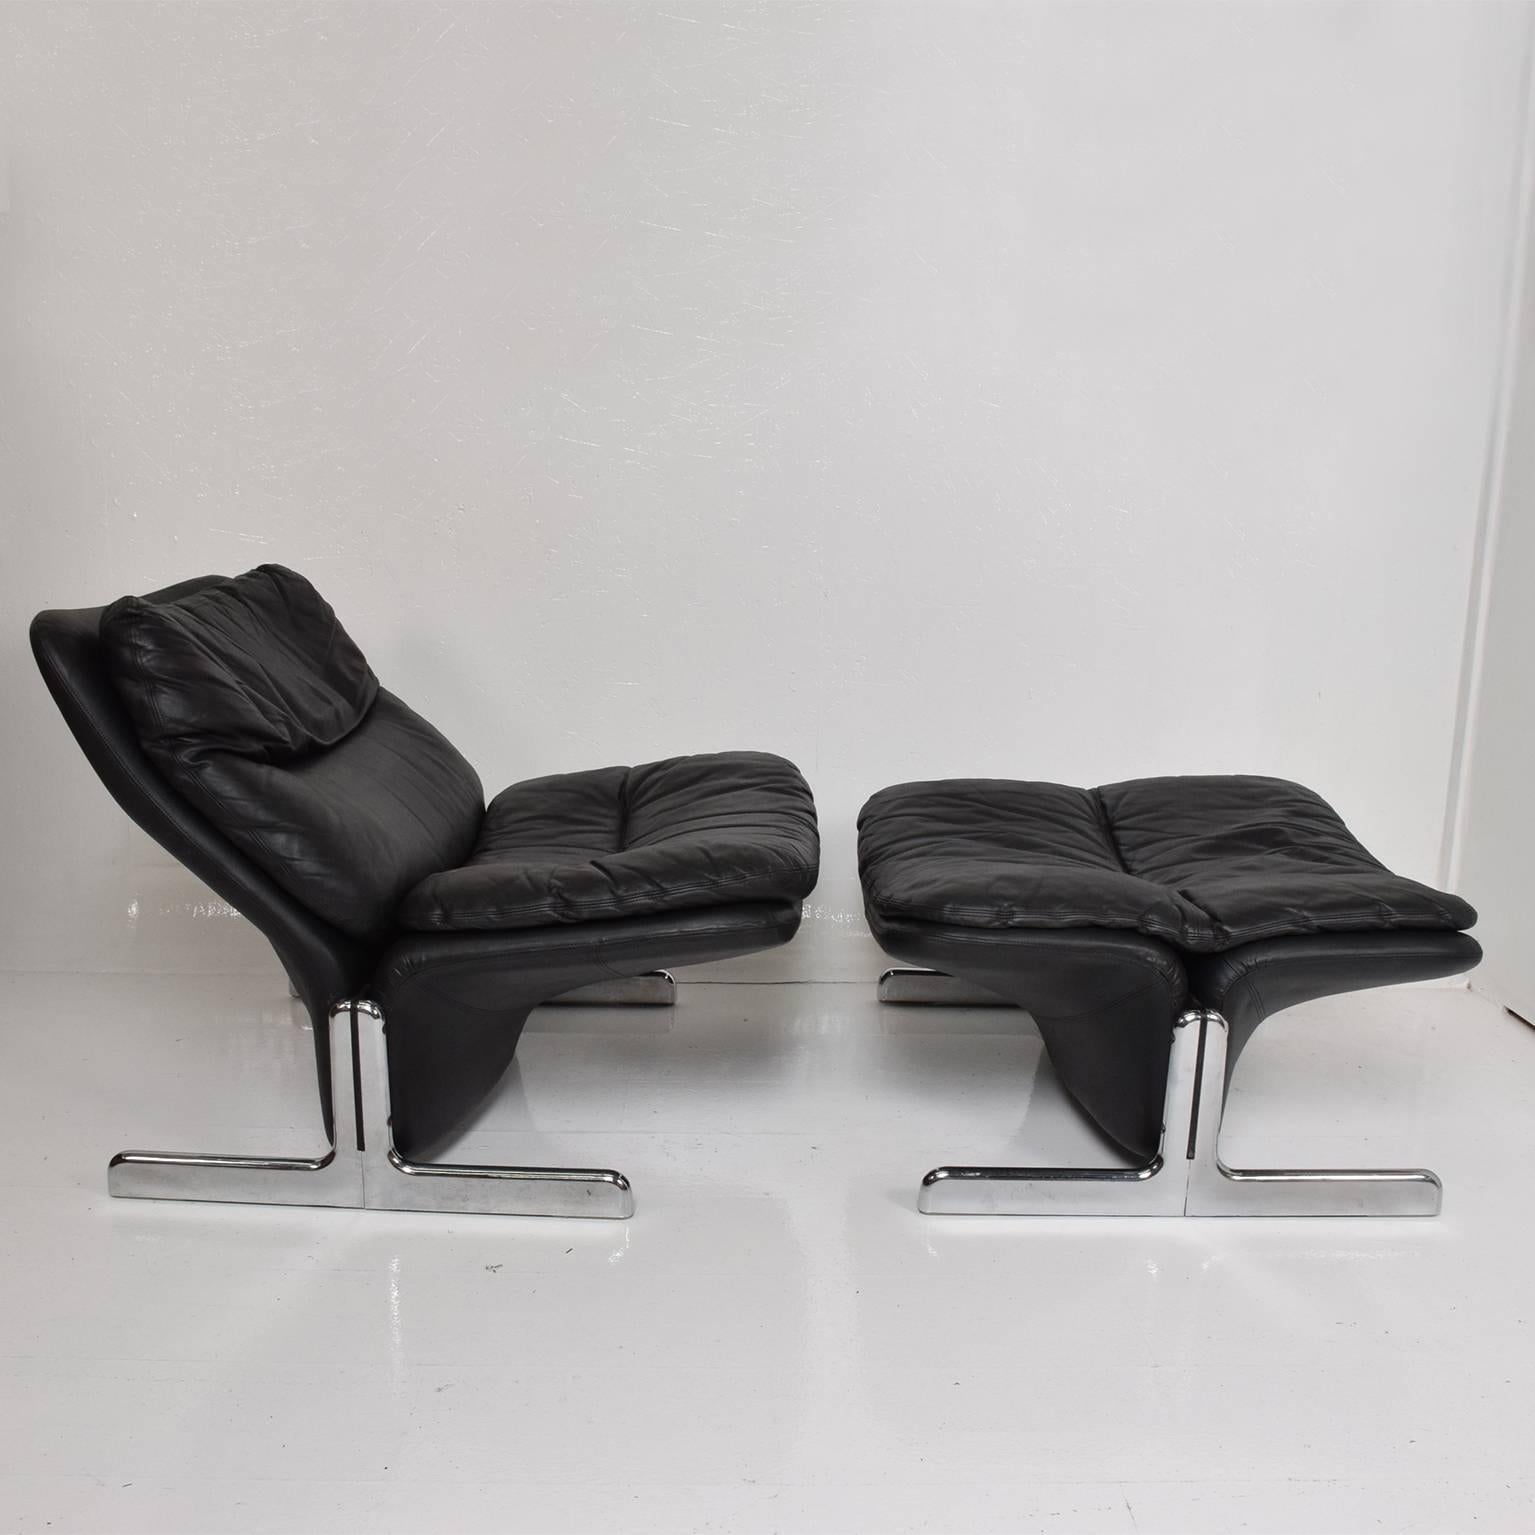 AMBIANIC offering:   1970s Modern Leather Lounge Chair & Ottoman by Tittina Ammannati & Vitelli Giampiero for Brunati in ITALY.

Black Leather & Chrome plated steel. Midcentury Modern Mad all the way.
Dimensions: Chair 28 1/2